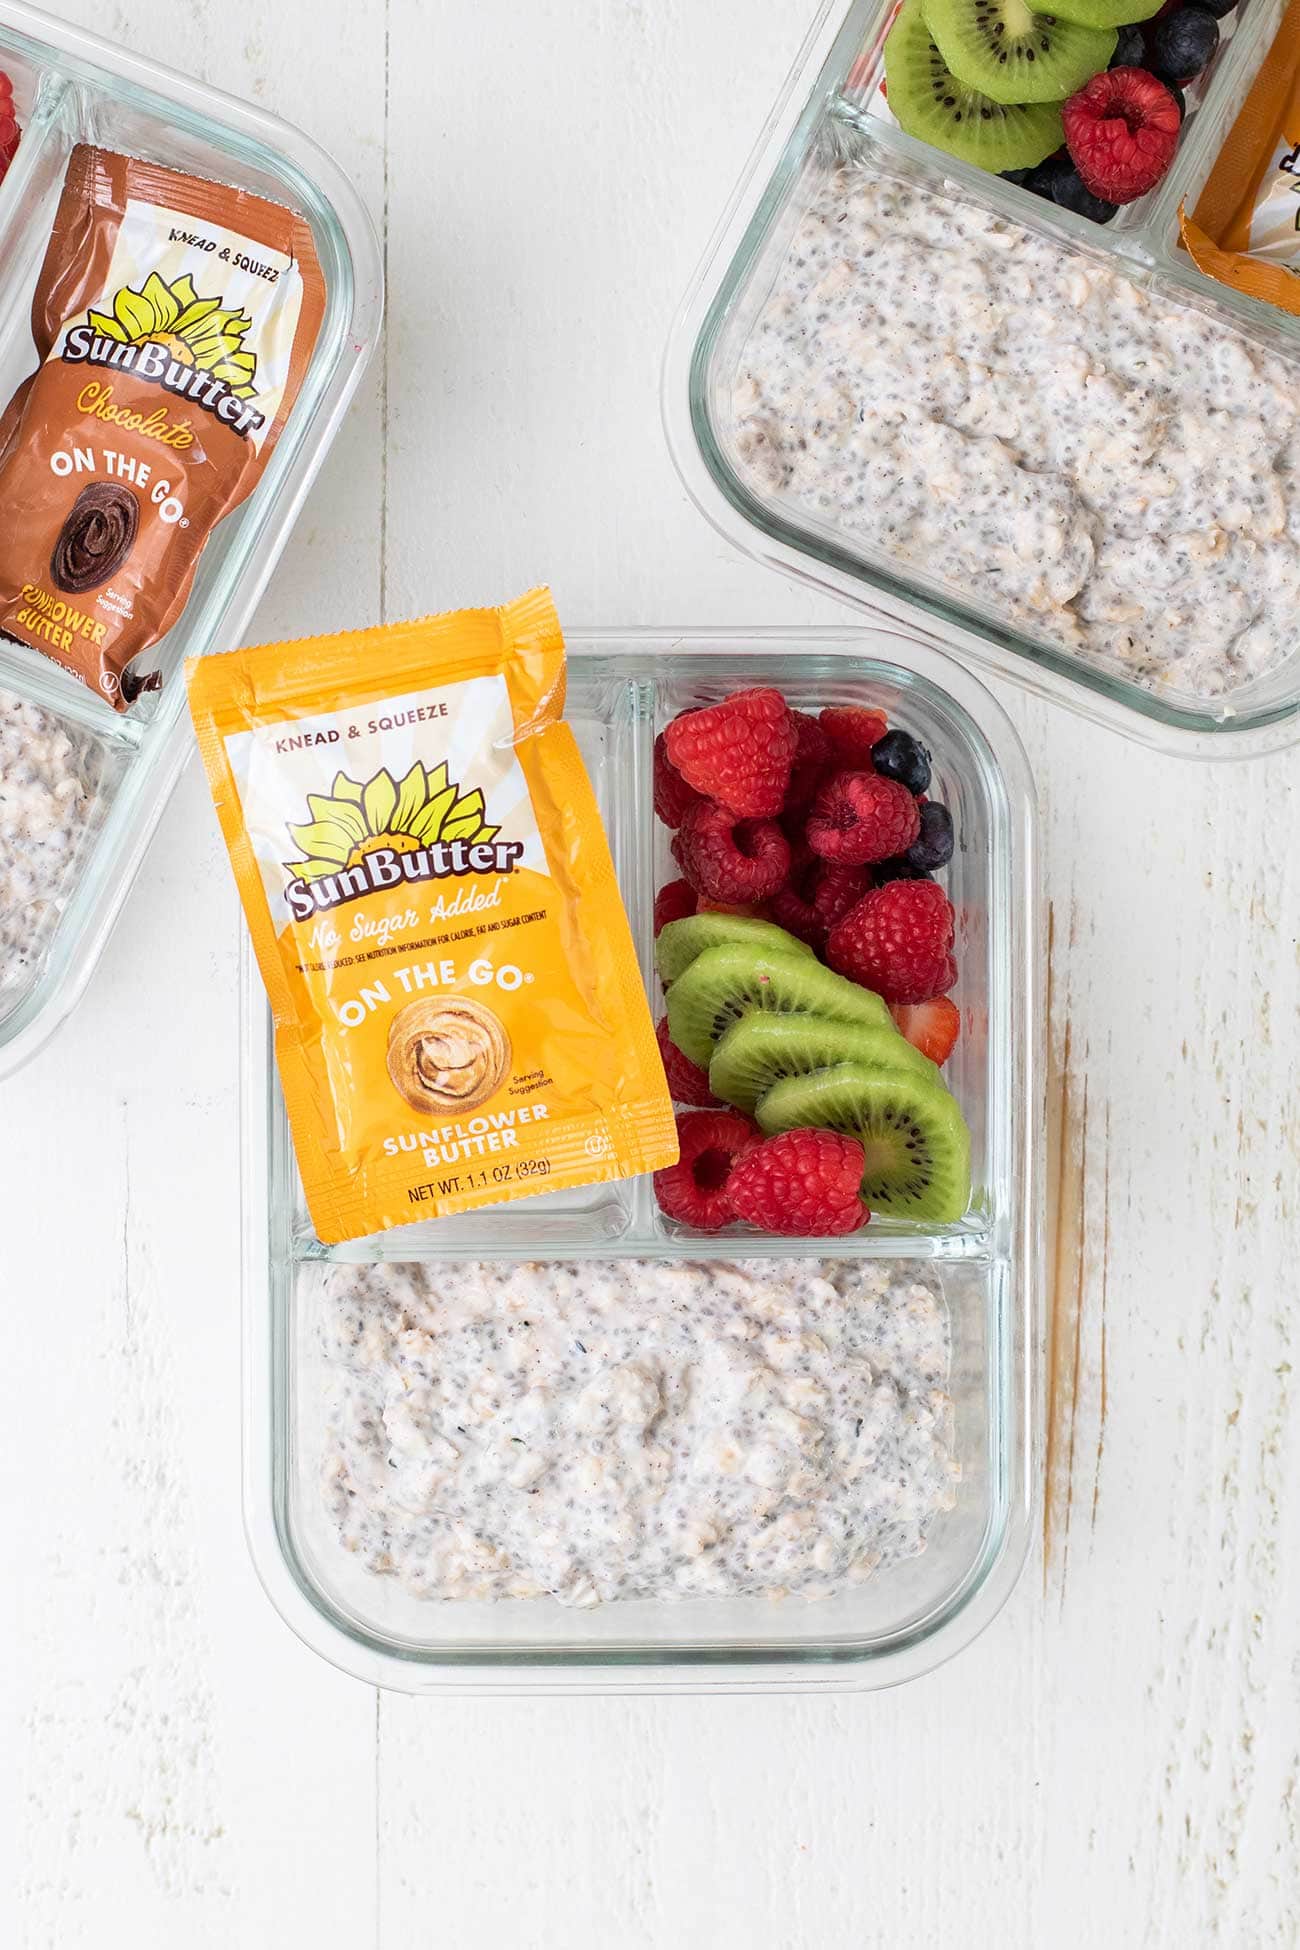 Overnight oats packed in meal prep containers with toppings.